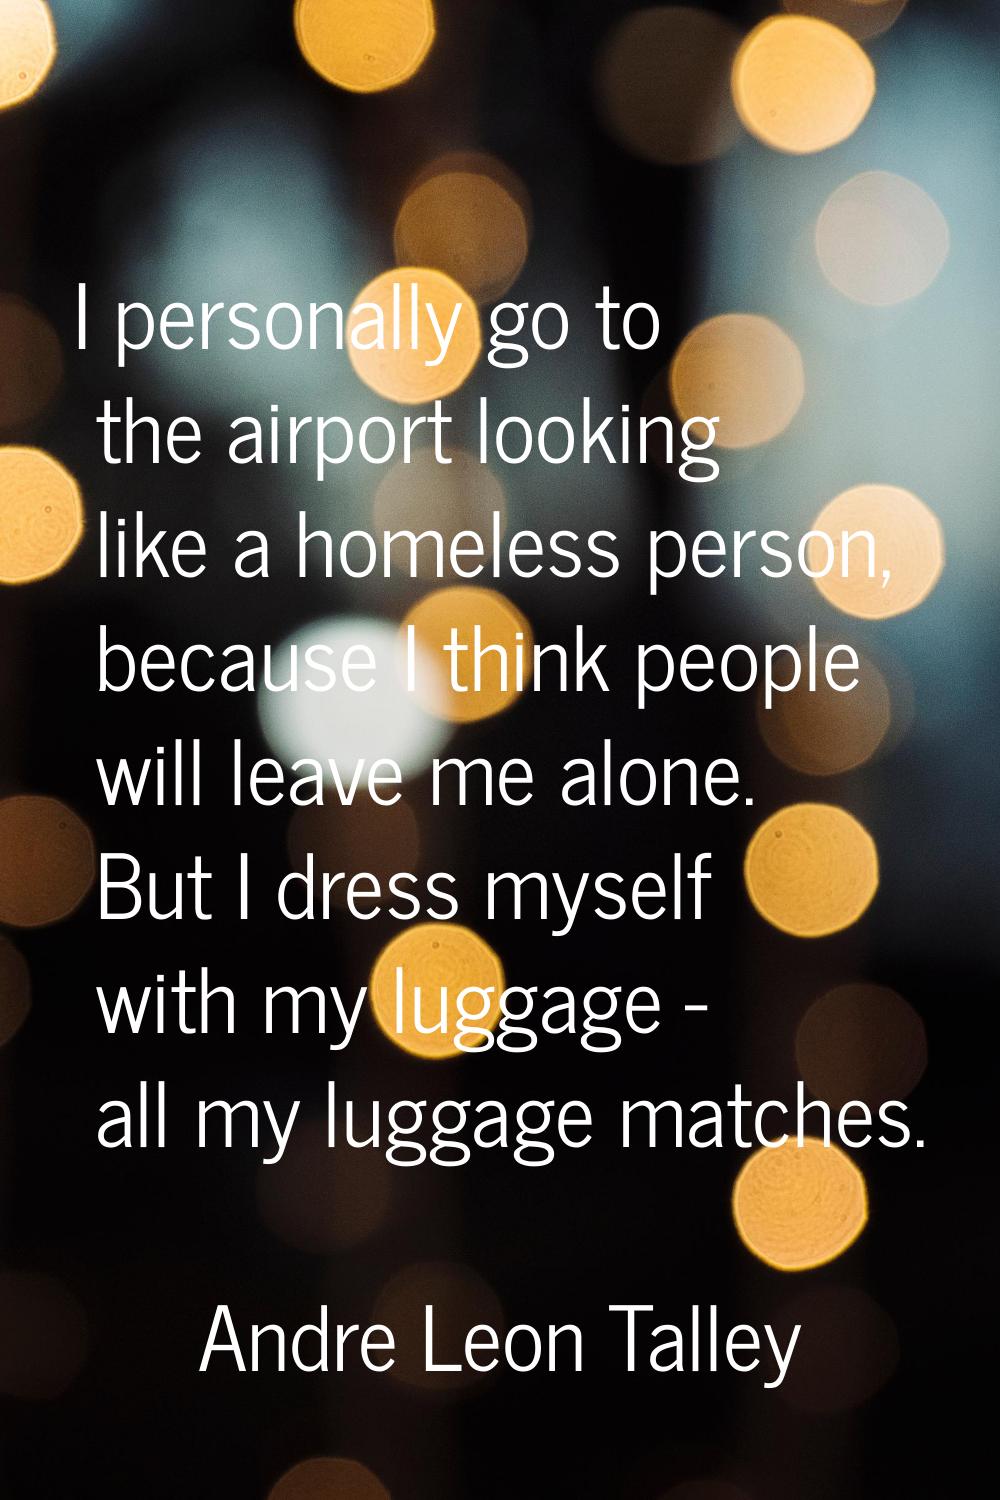 I personally go to the airport looking like a homeless person, because I think people will leave me